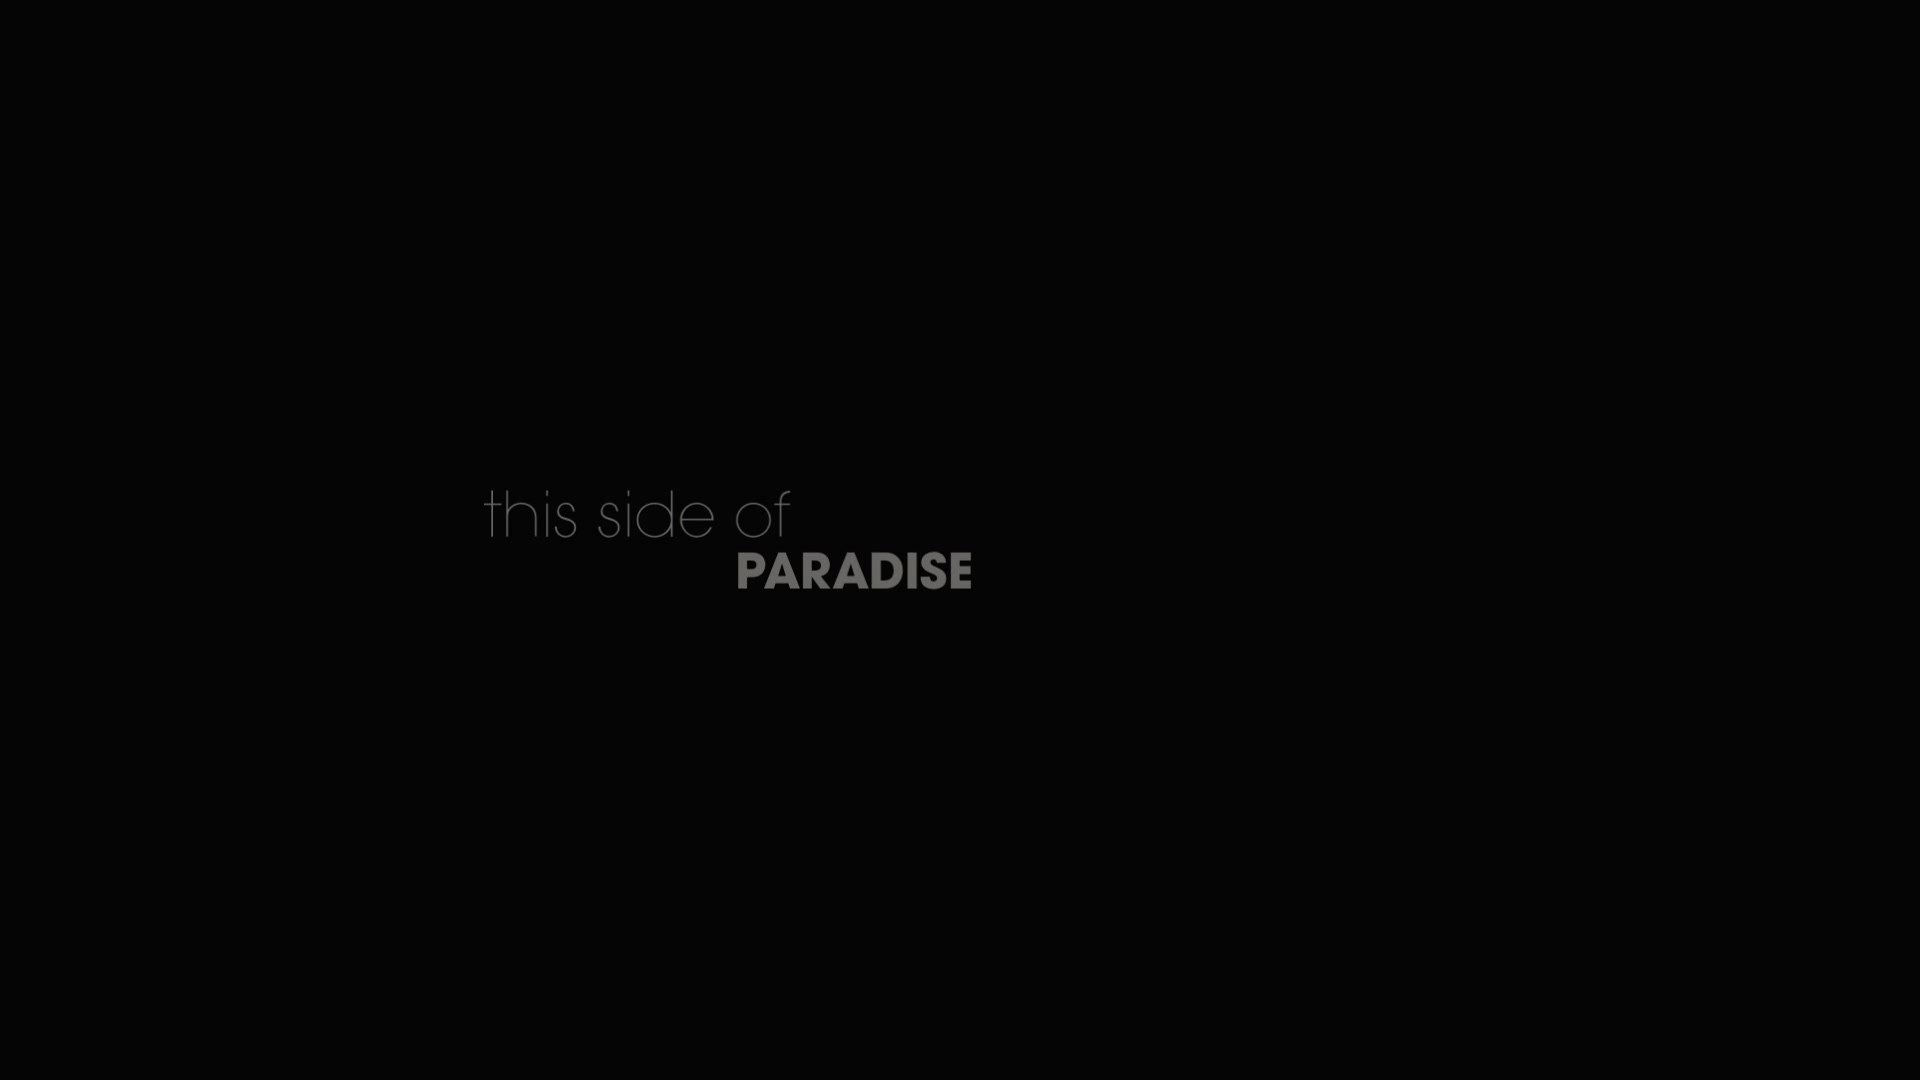 XPORN - This Side Of Paradise (Ivy)